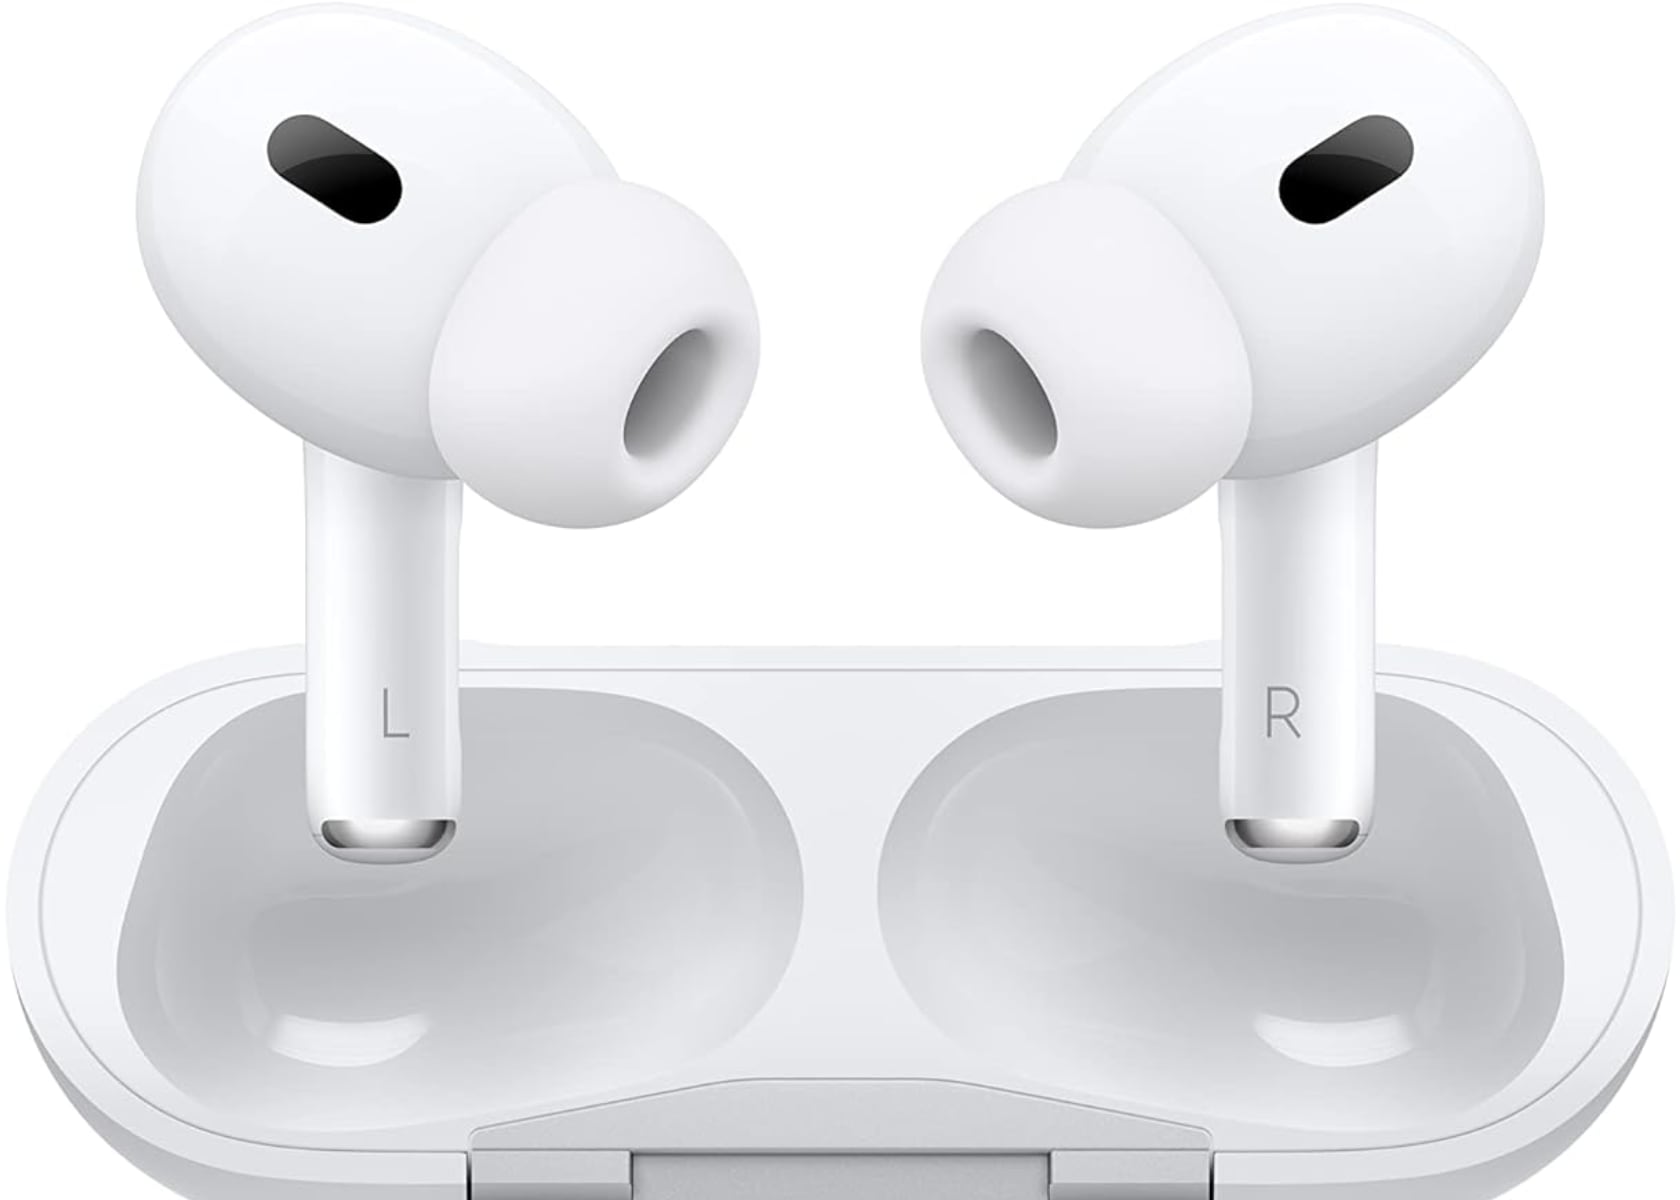 #Apple’s AirPods Pro 2 is My Everyday Carry I can’t live without